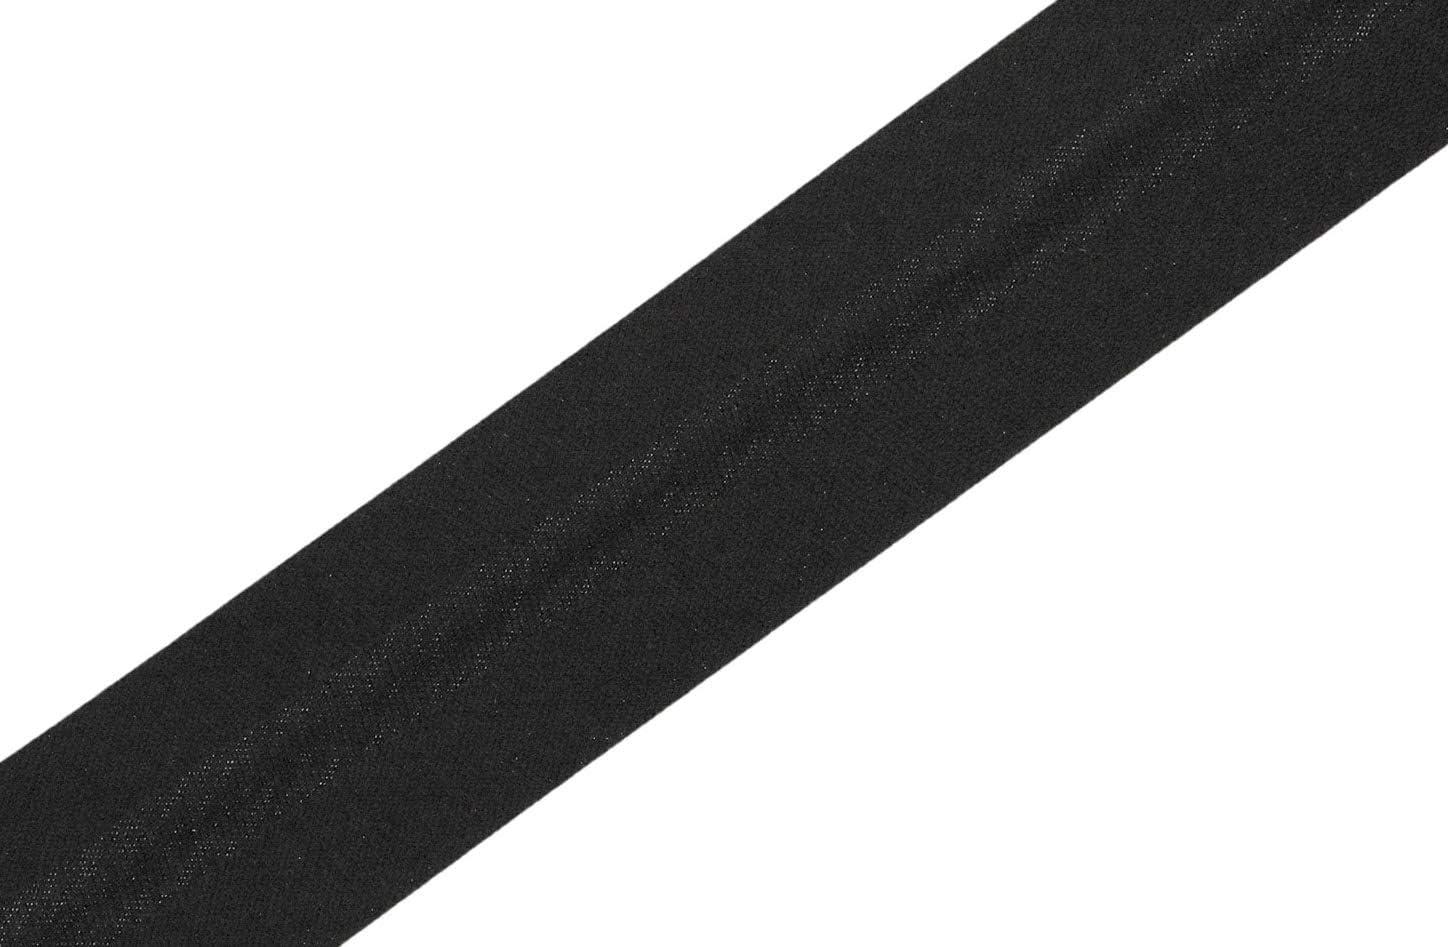 Bias Tape, Double Fold Bias Tape 1 Inch Continuous Bulk Bias Tape for  Sewing, Quilting, Binding, Hemming, Apparel Craft, Polyester,  Non-Stretch(Black